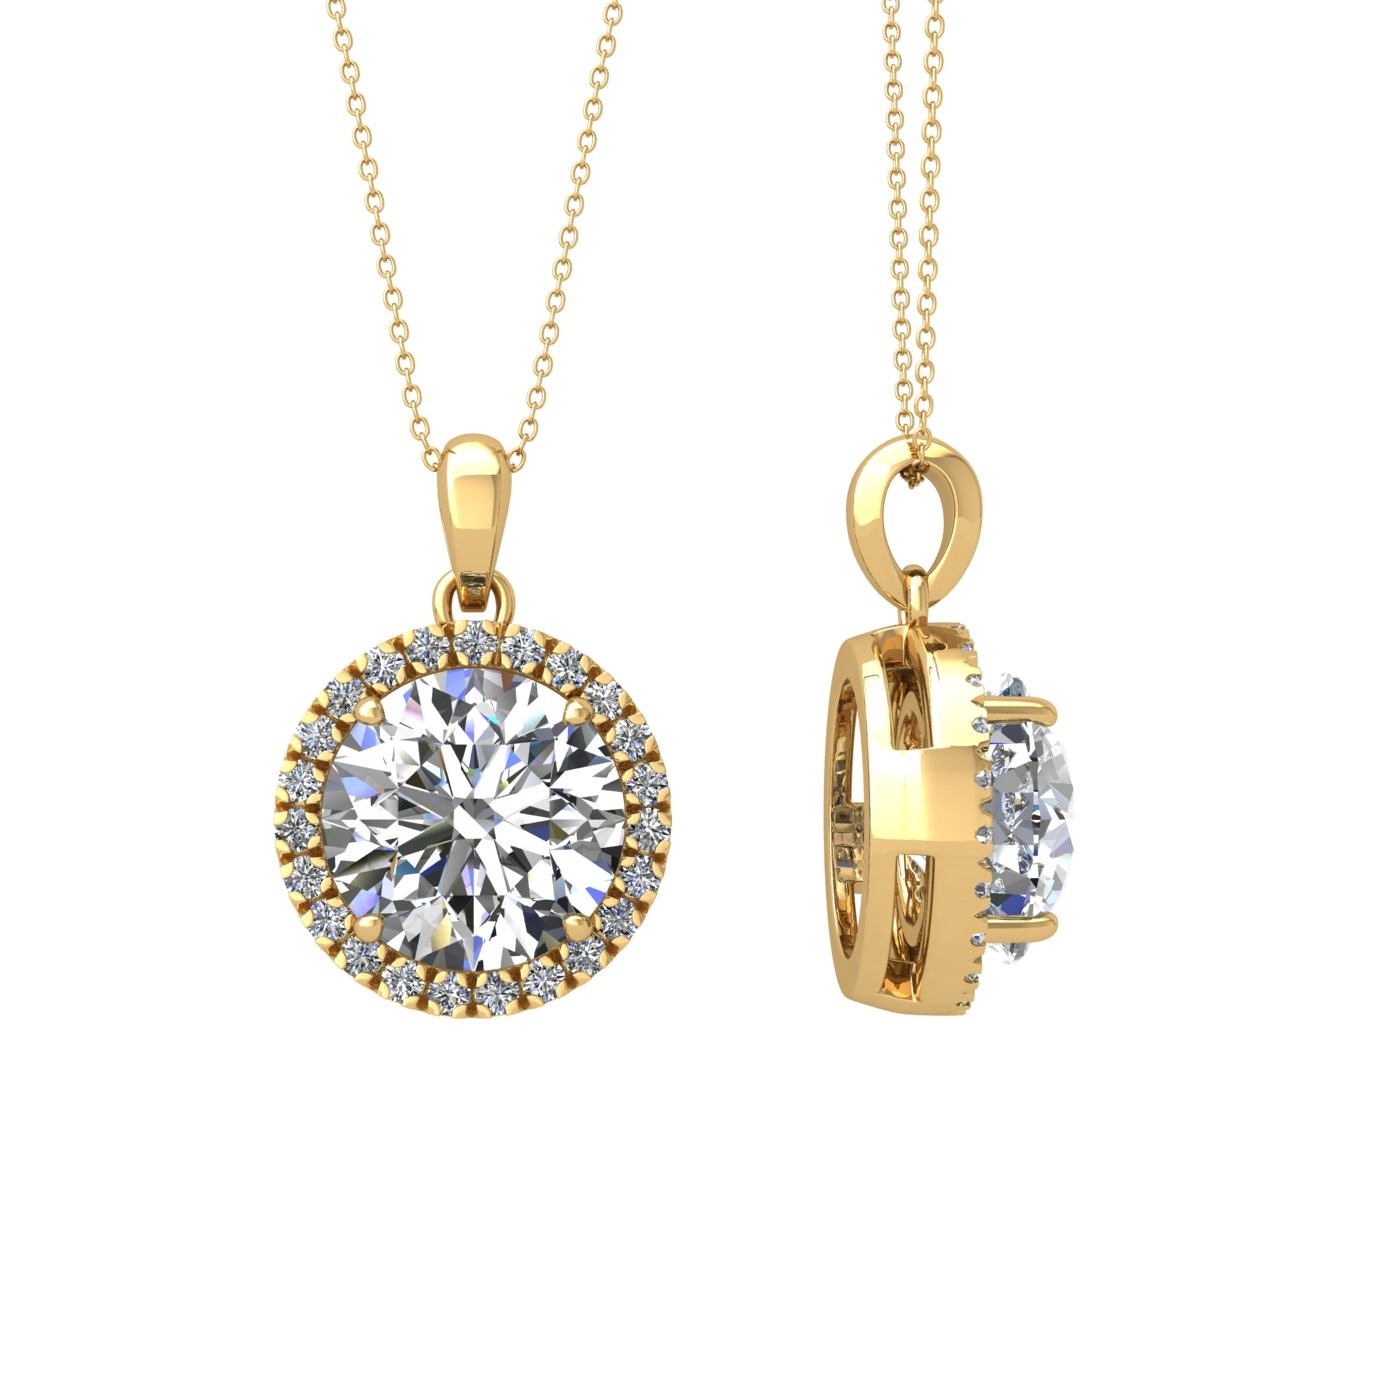 18k yellow gold  1,2 ct 4 prong round shape diamond pendant with diamond pavÉ set halo including chain seperate from the pendant